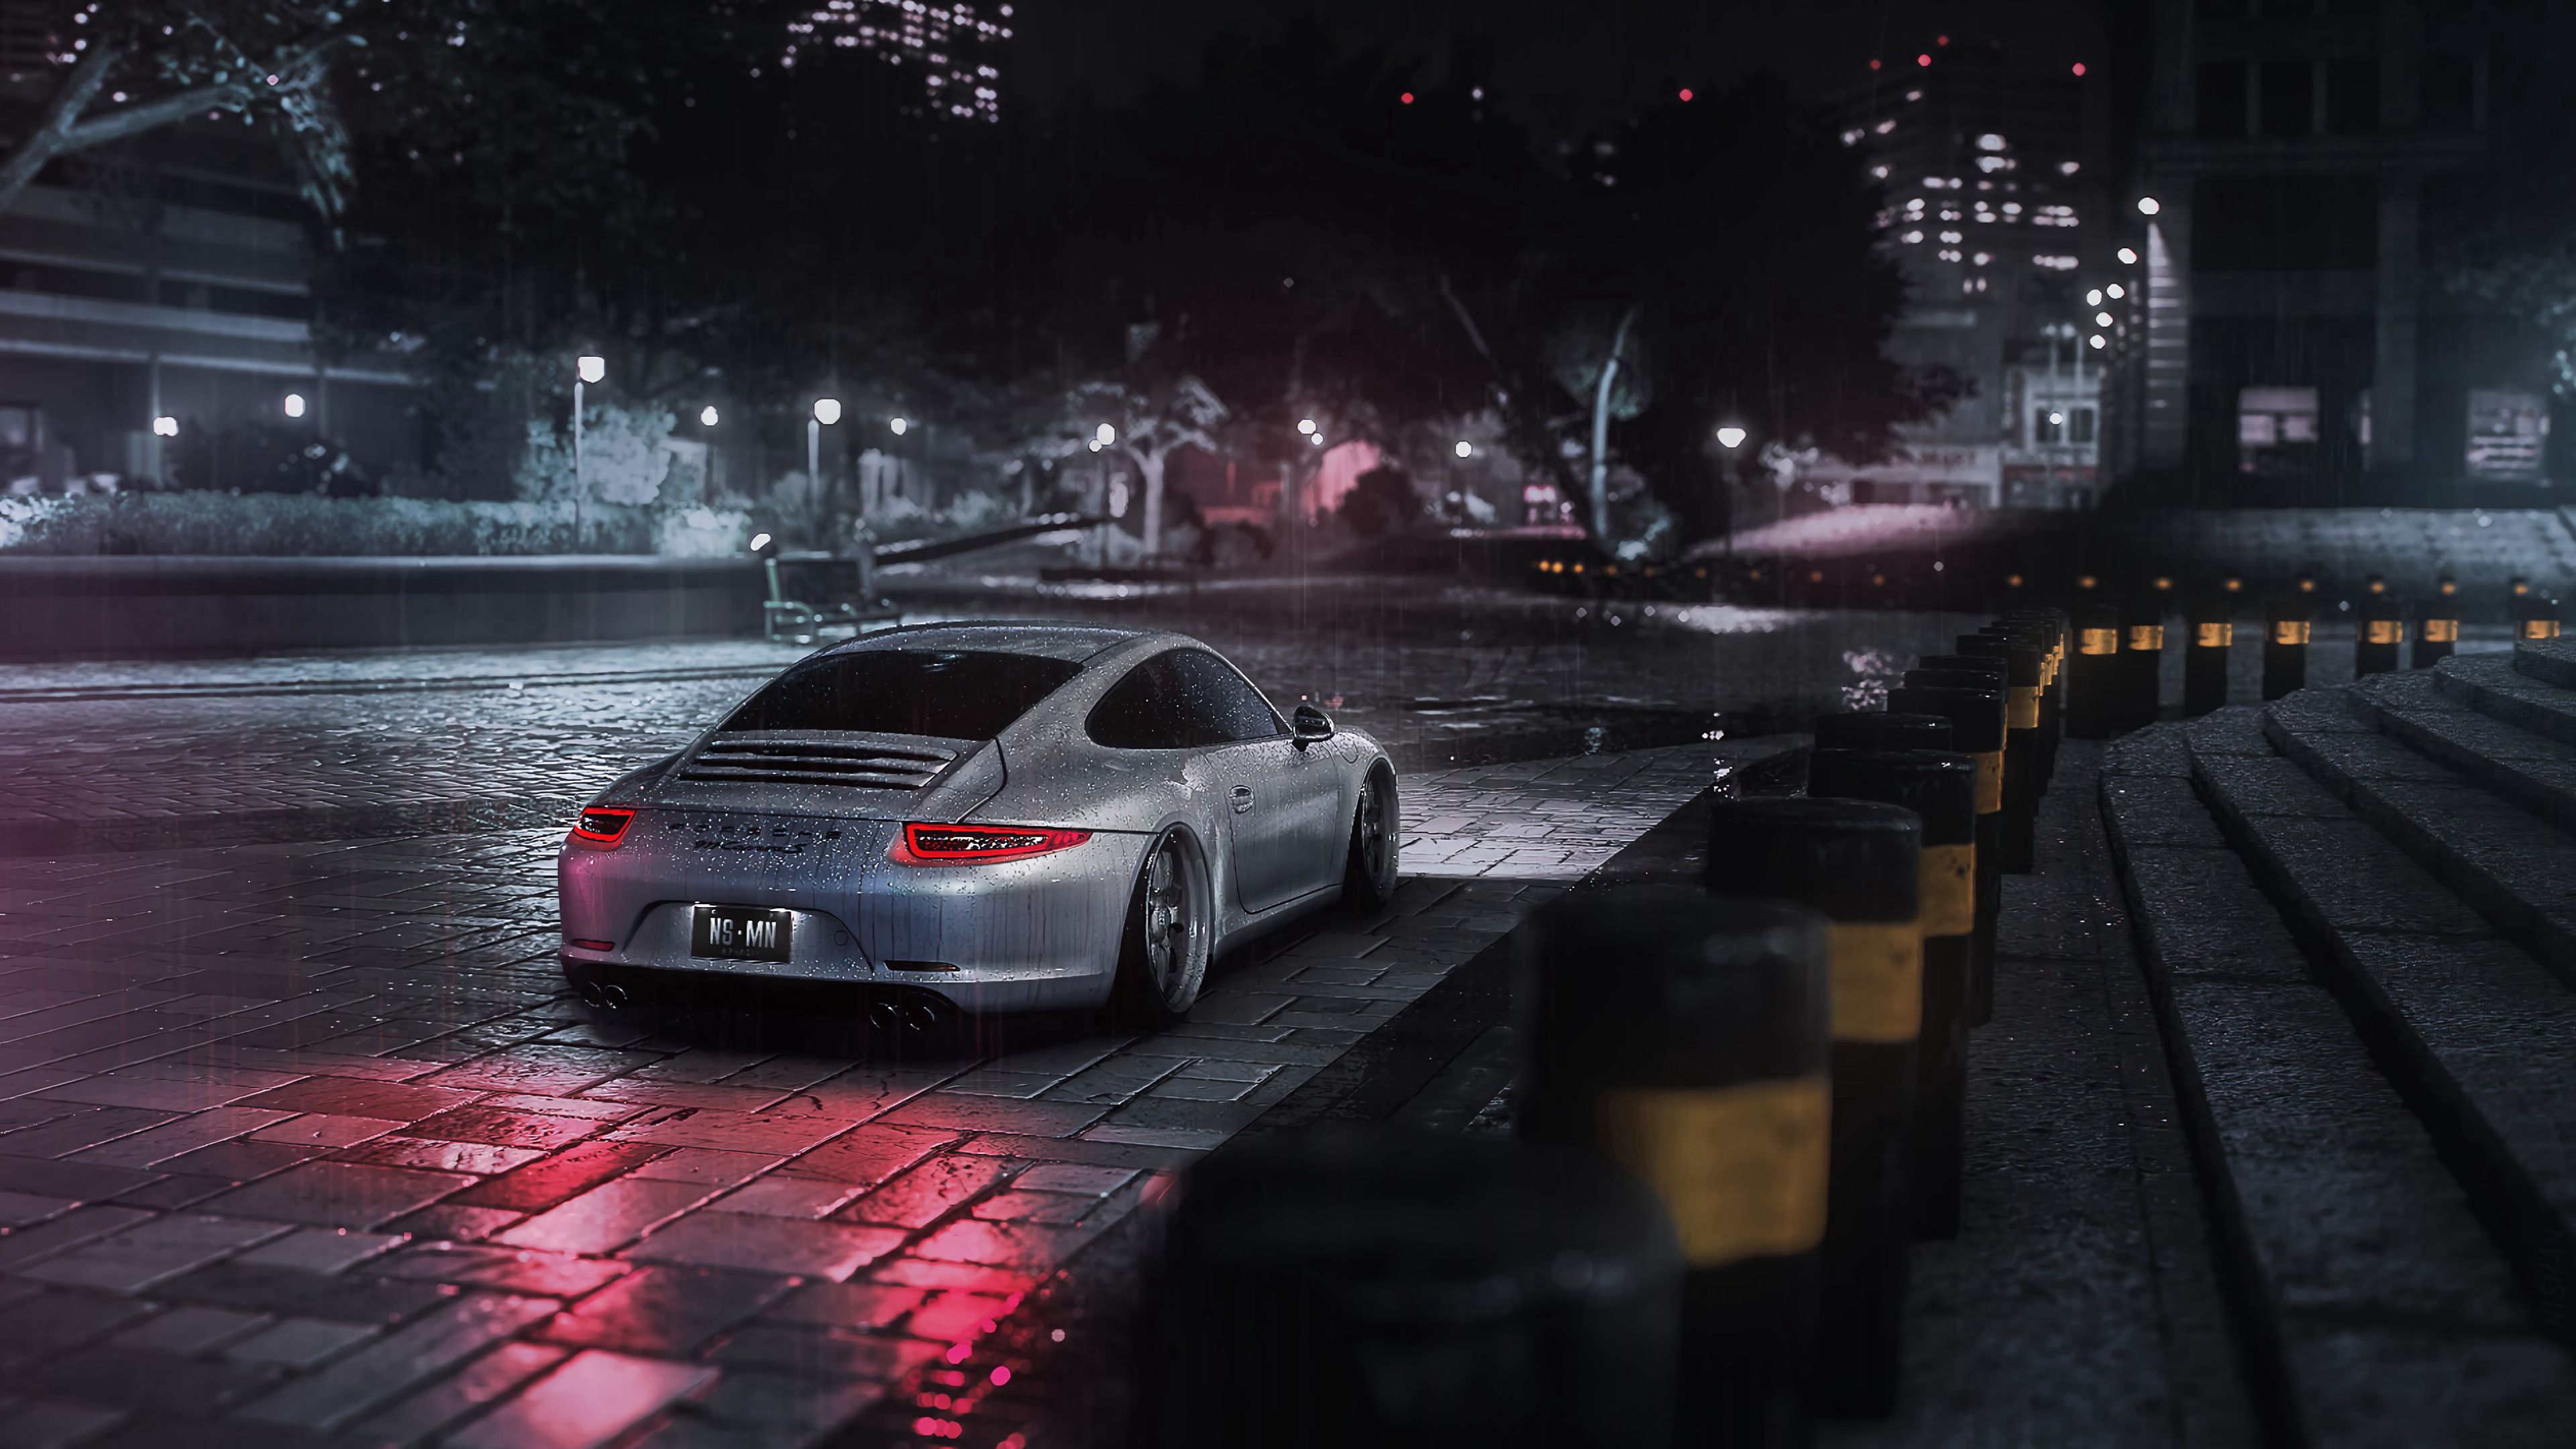 Wallpaper for mobile devices cars, grey, car, night